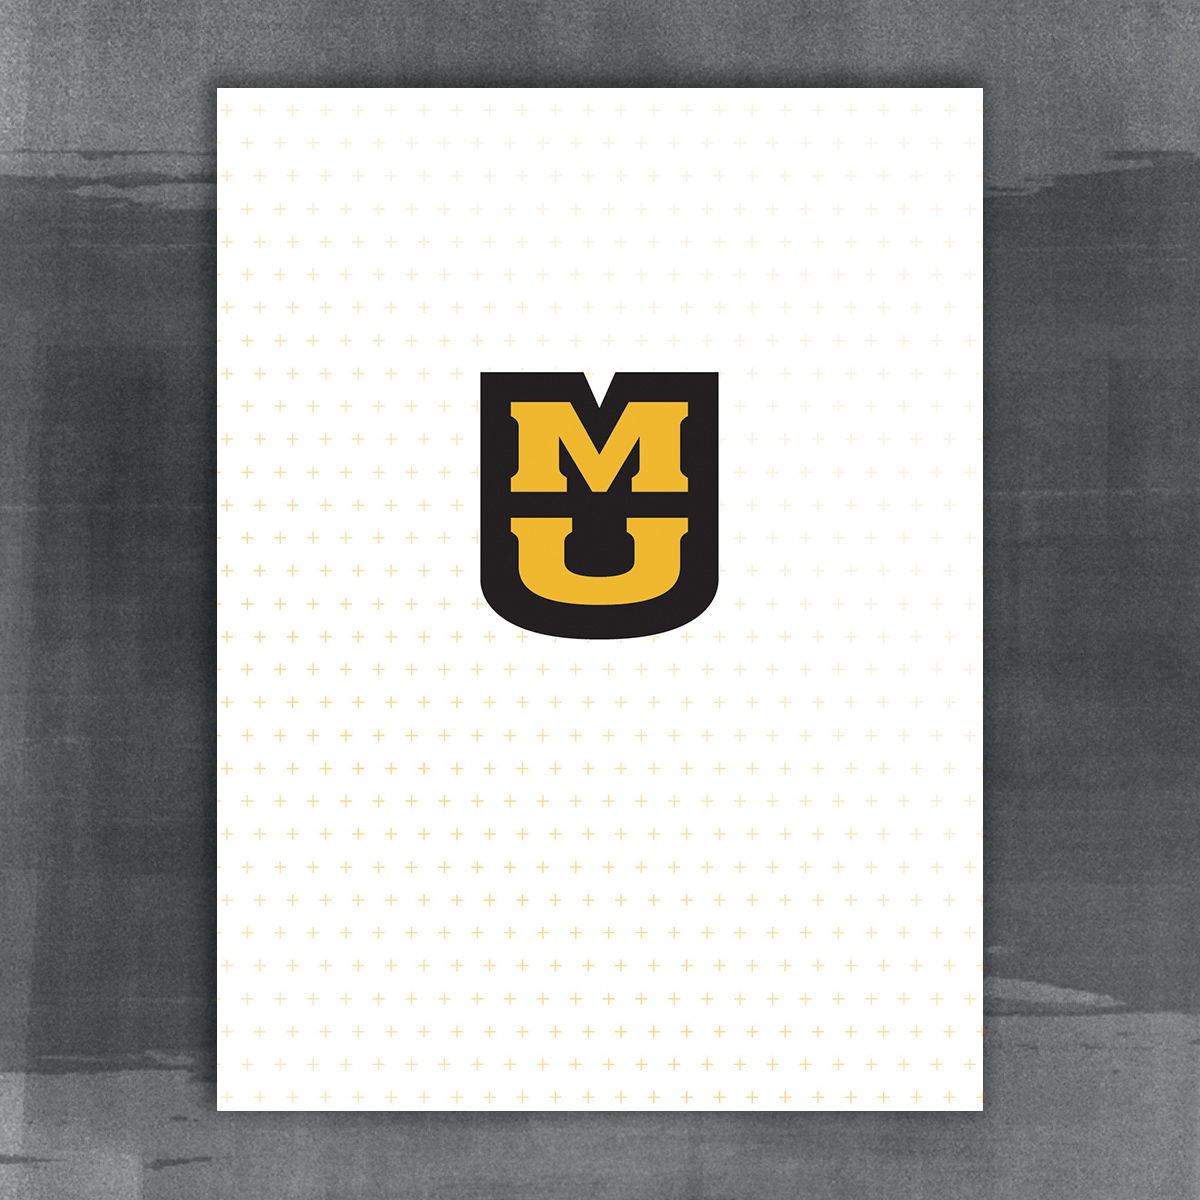 9x12 pocket folder. White with gradient gold plus pattern. Stacked MU in the center